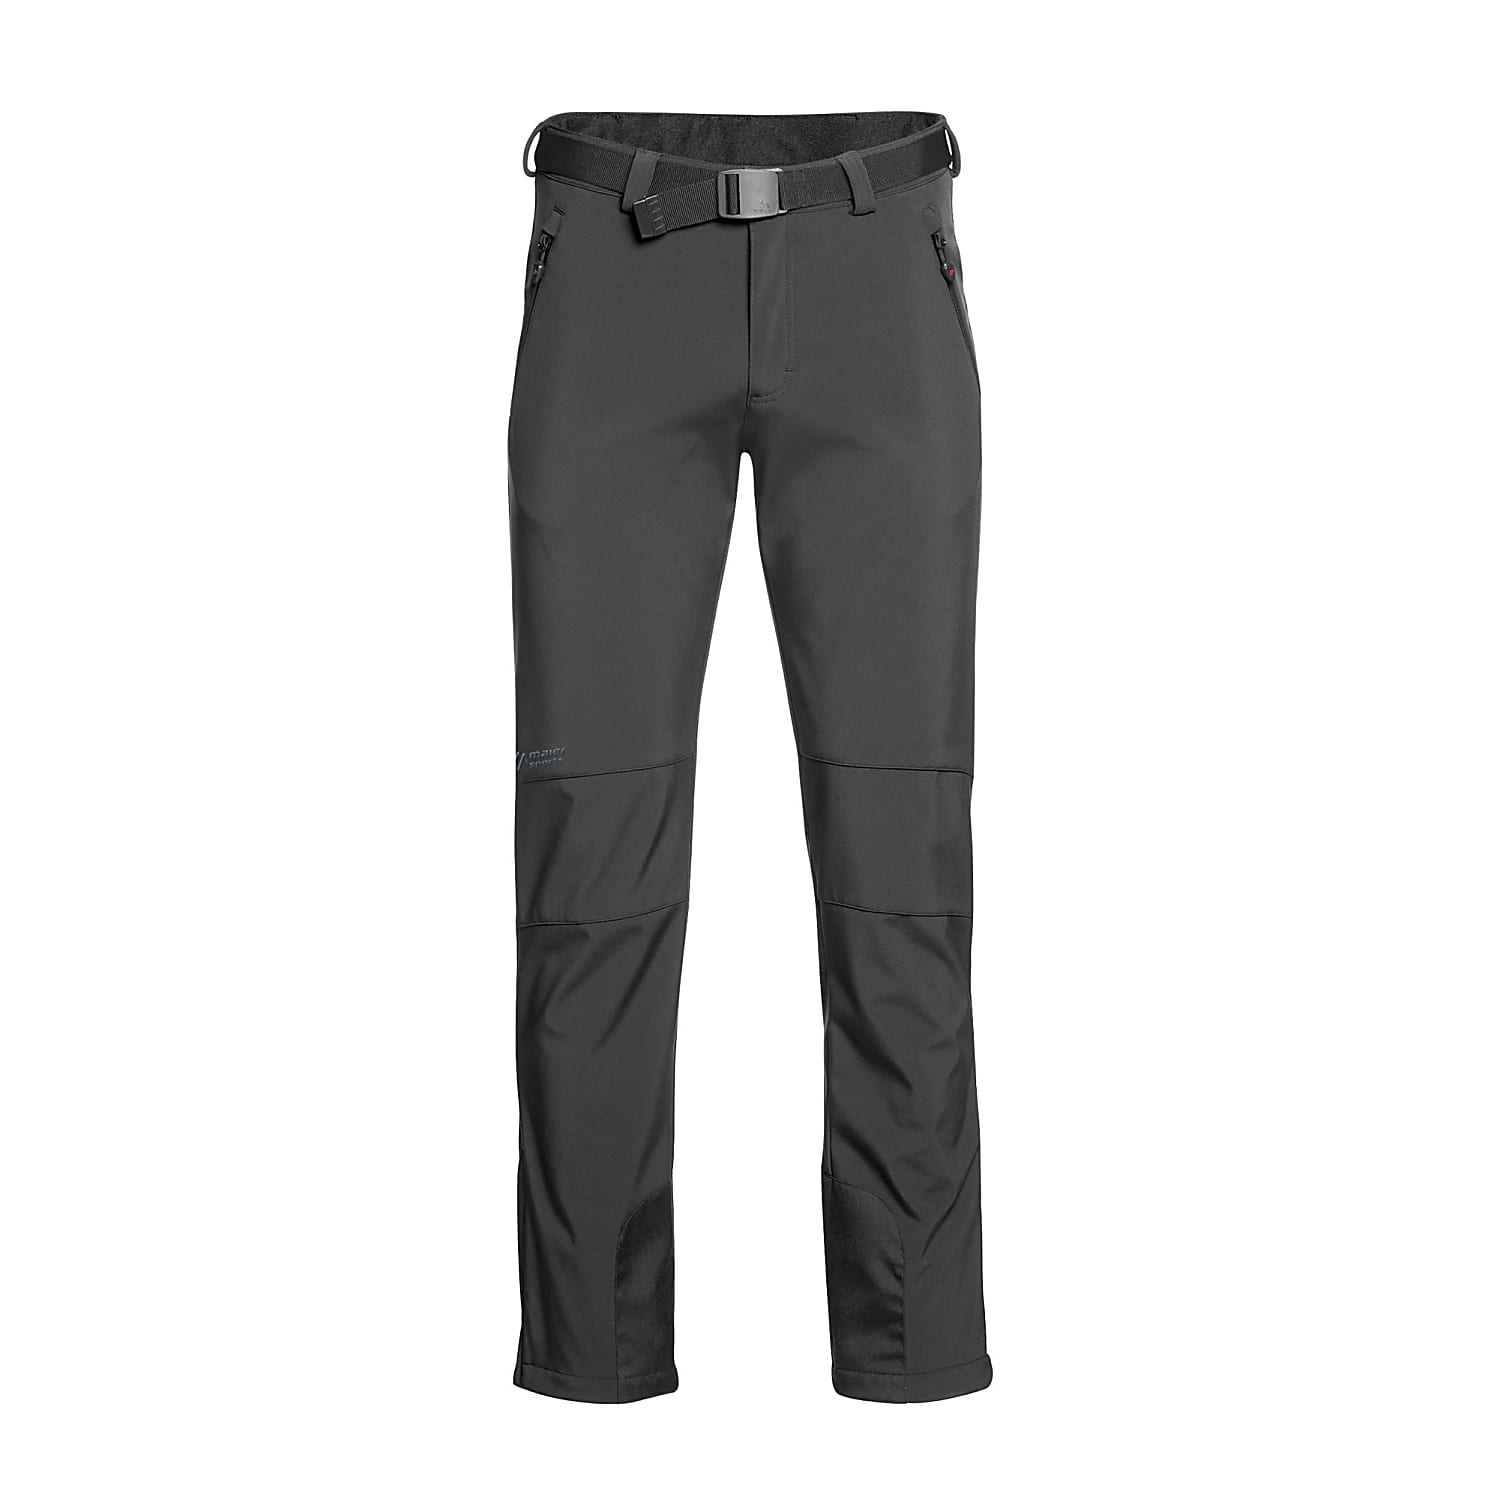 Sports - M TECH and PANTS shipping Maier cheap Black Fast OVERSIZE,